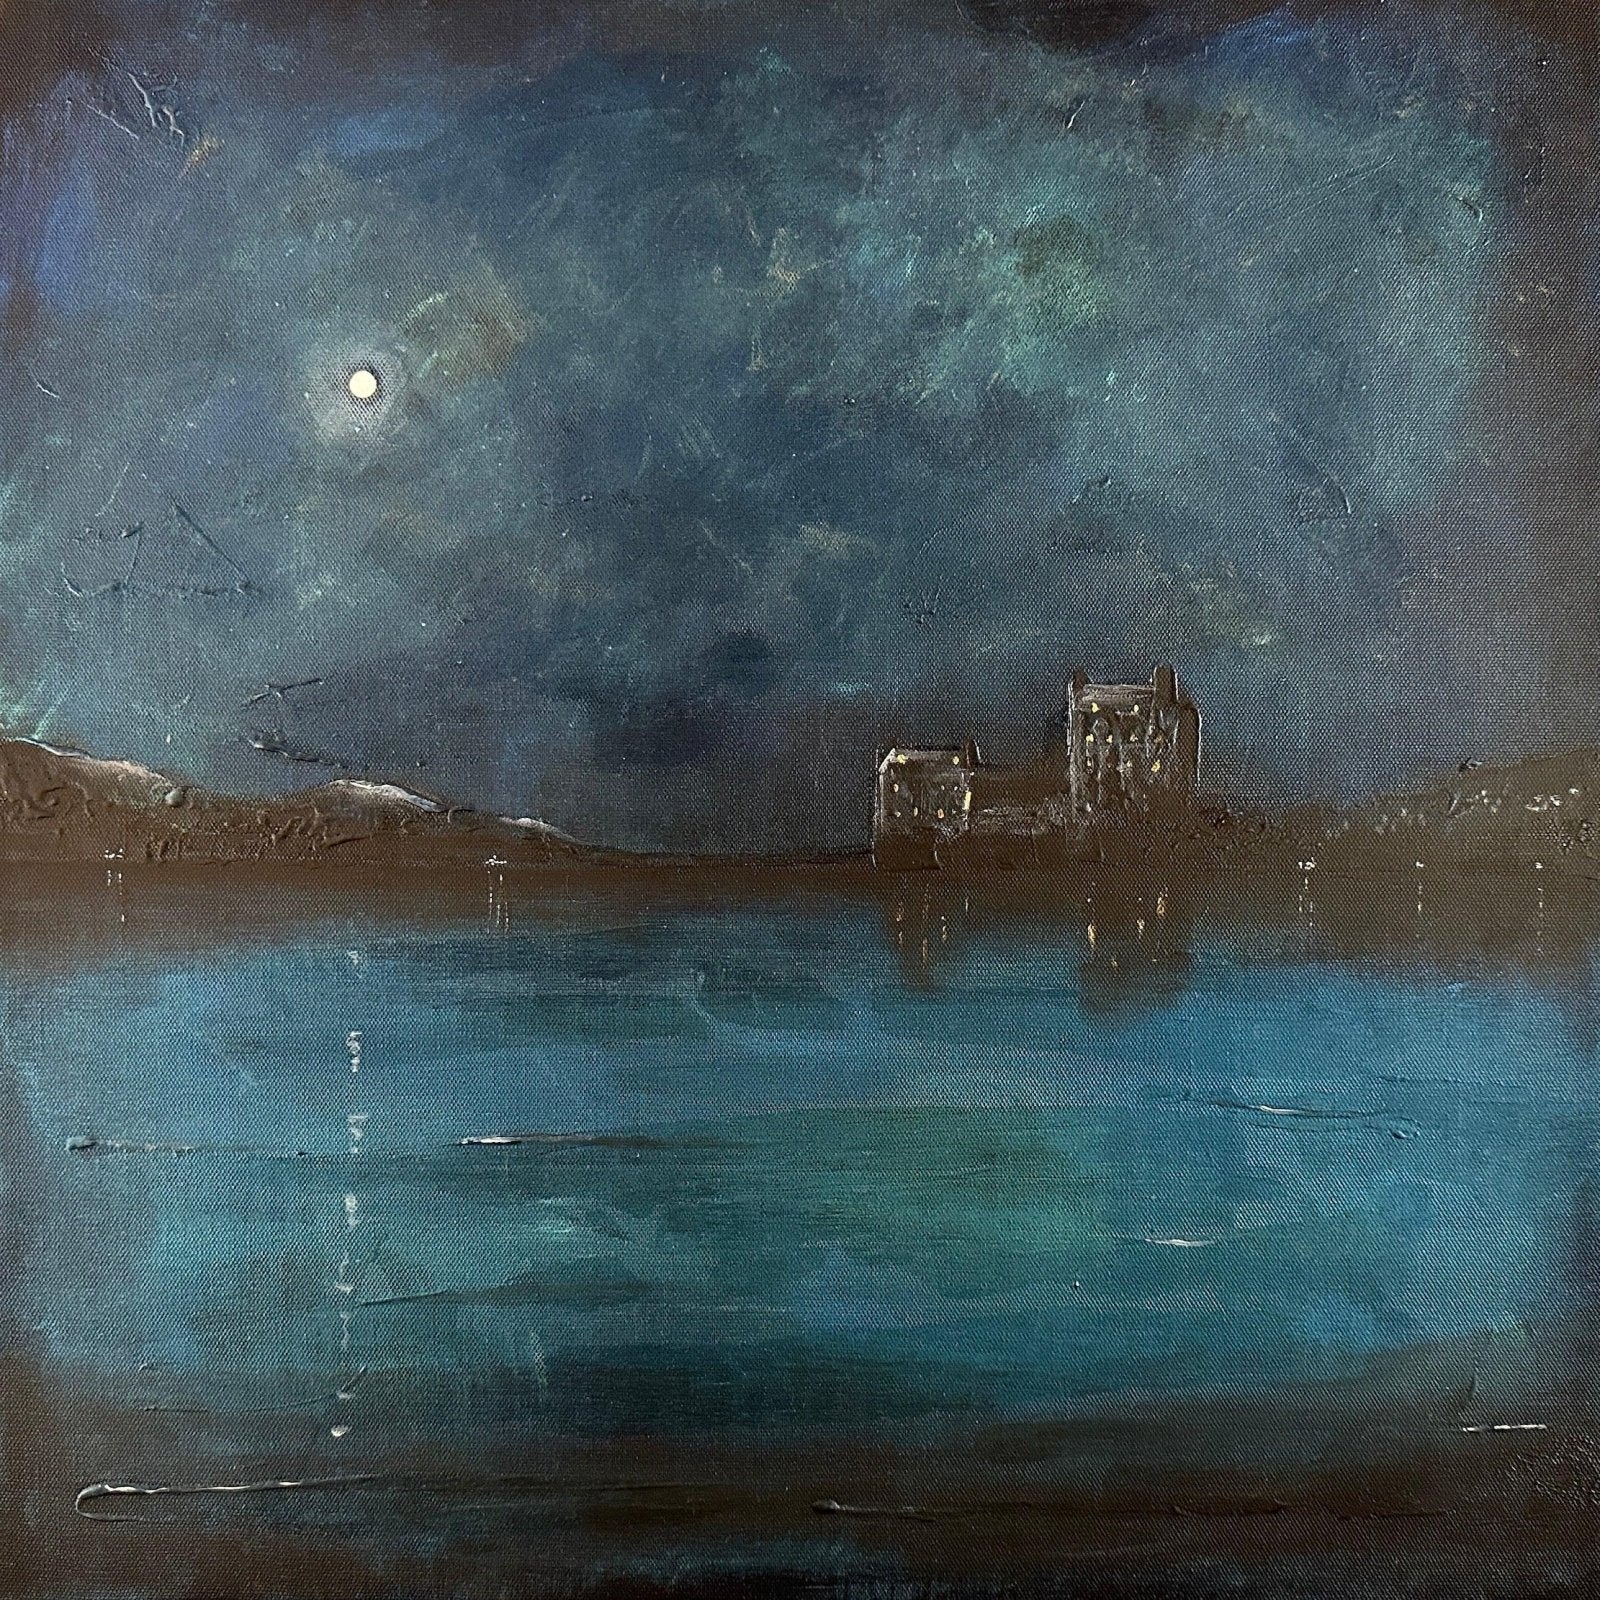 Eilean Donan Castle Prussian Twilight Original Landscape Painting-Original Paintings-Historic & Iconic Scotland Art Gallery-Paintings, Prints, Homeware, Art Gifts From Scotland By Scottish Artist Kevin Hunter